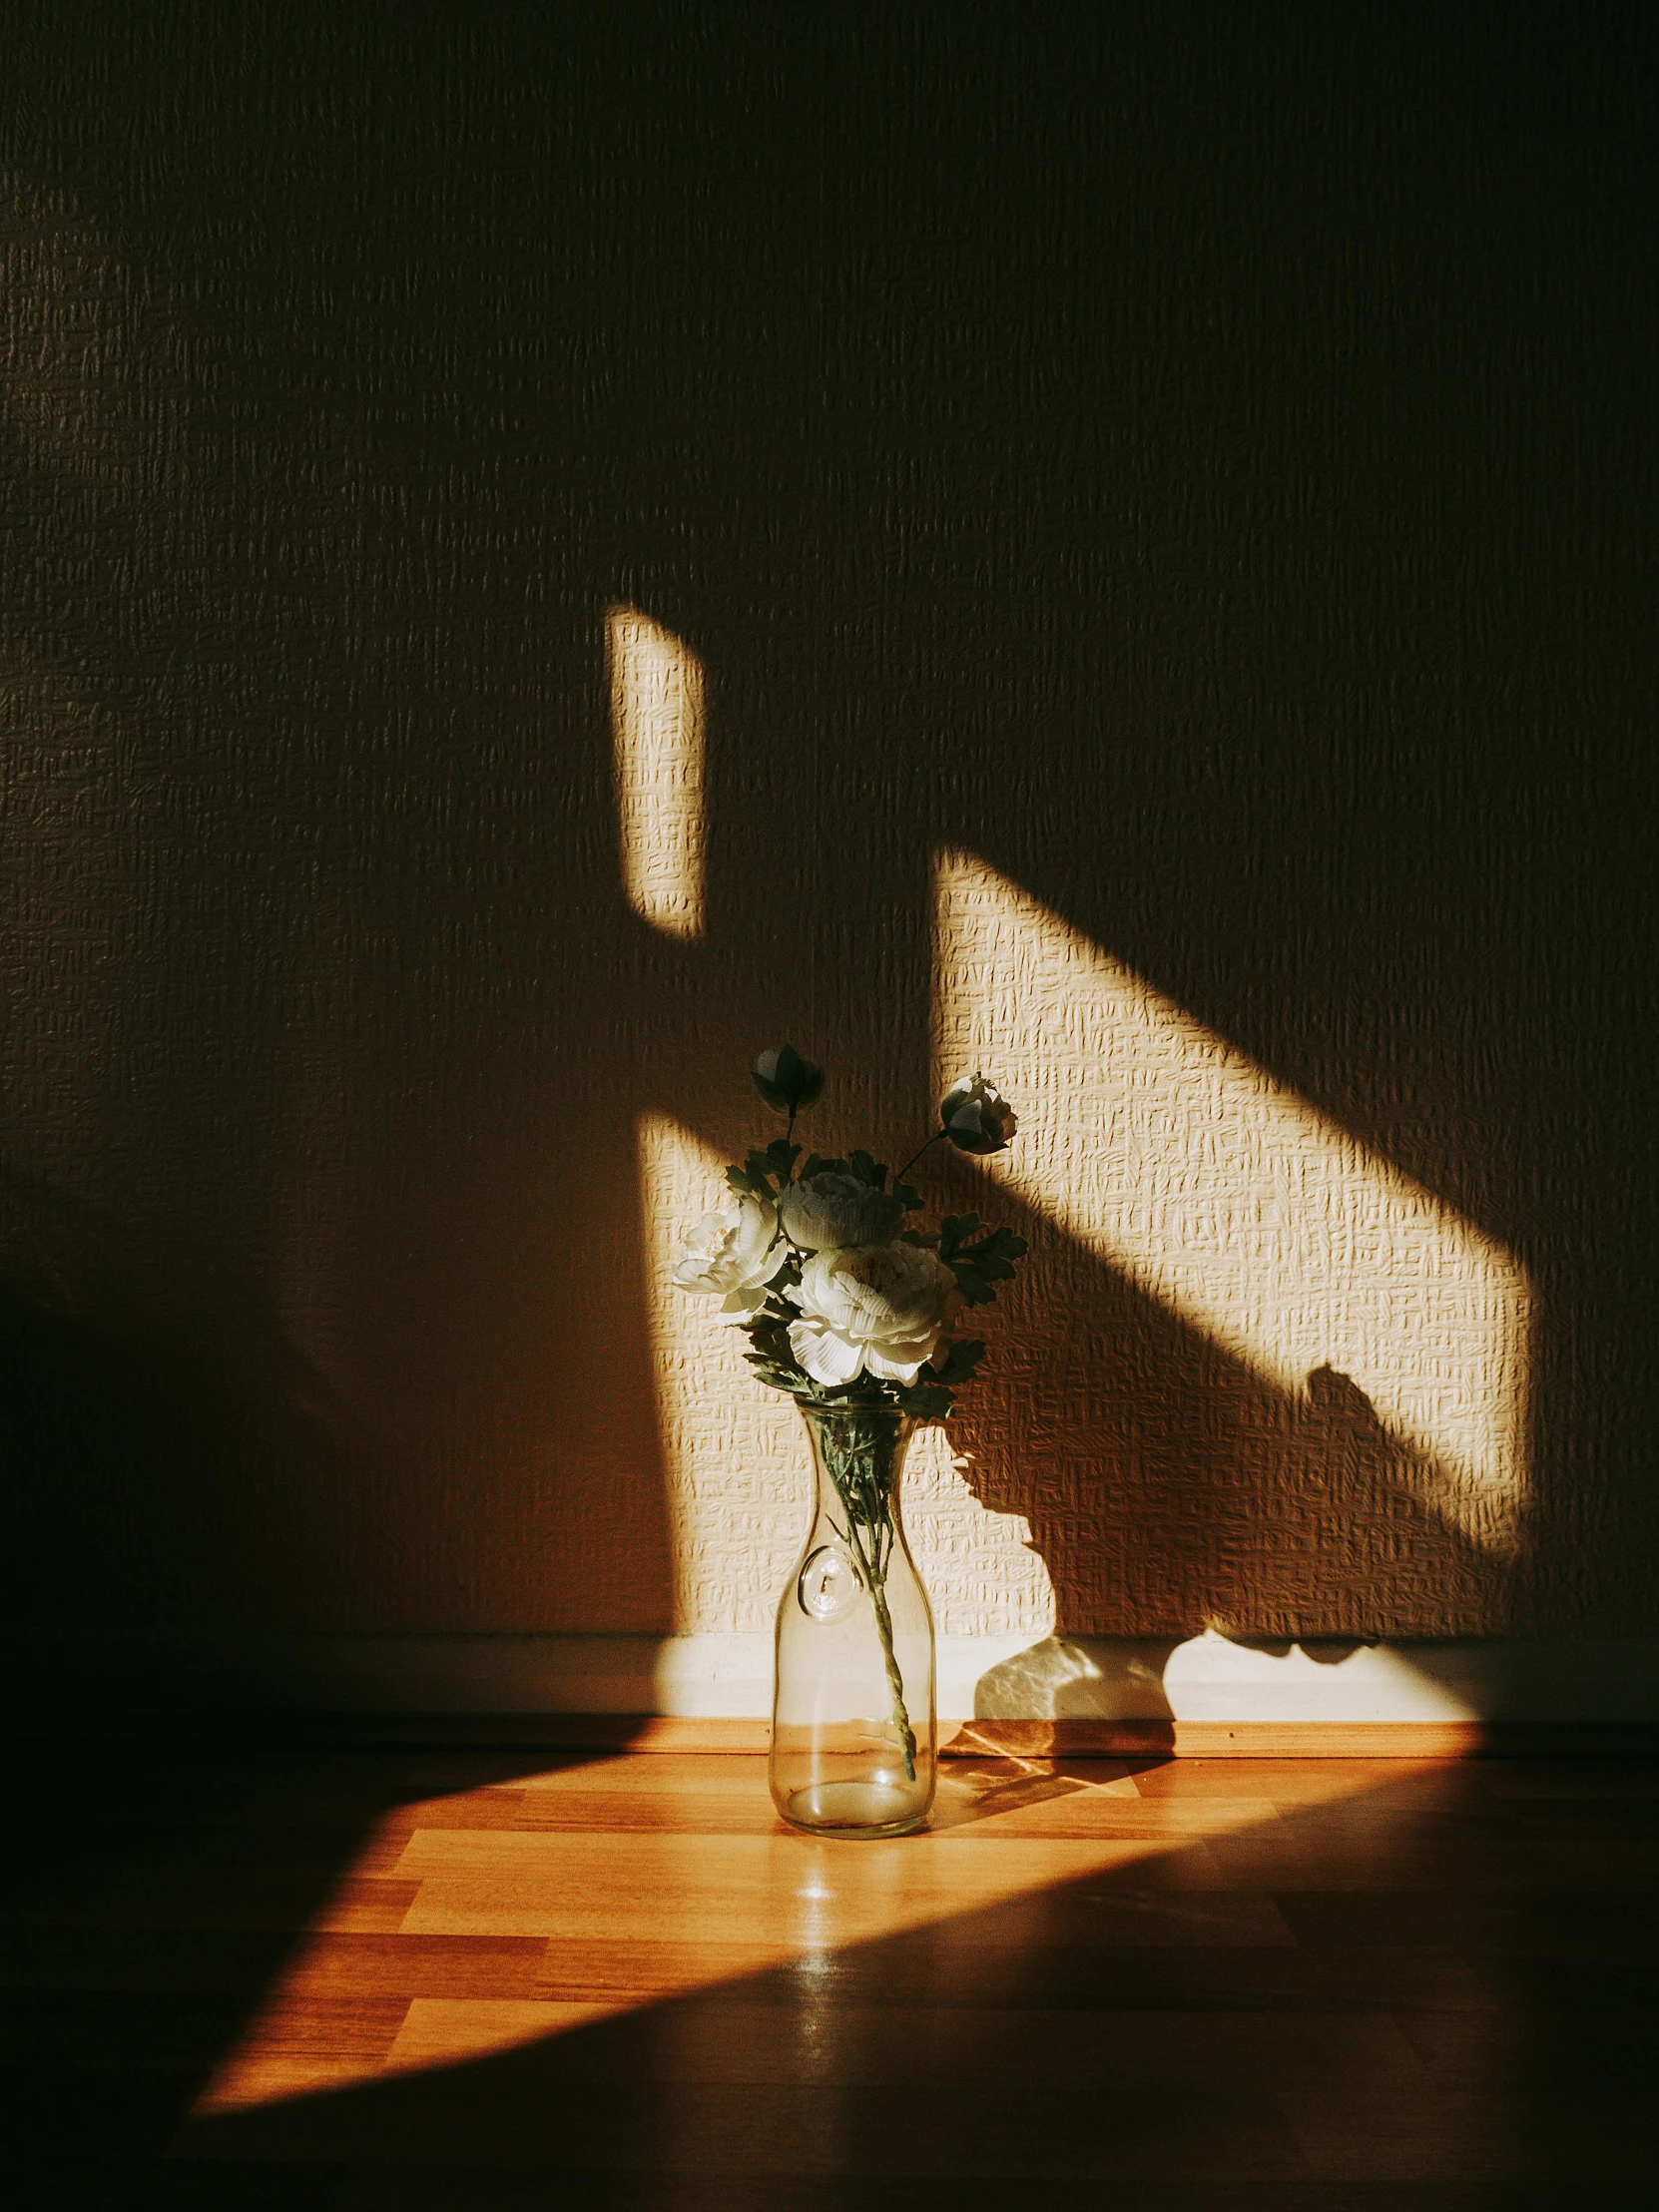 a vase filled with flowers sitting on top of a wooden floor, unsplash contest winner, light and space, shadow play, sun puddle, liminal space aesthetic, consist of shadow